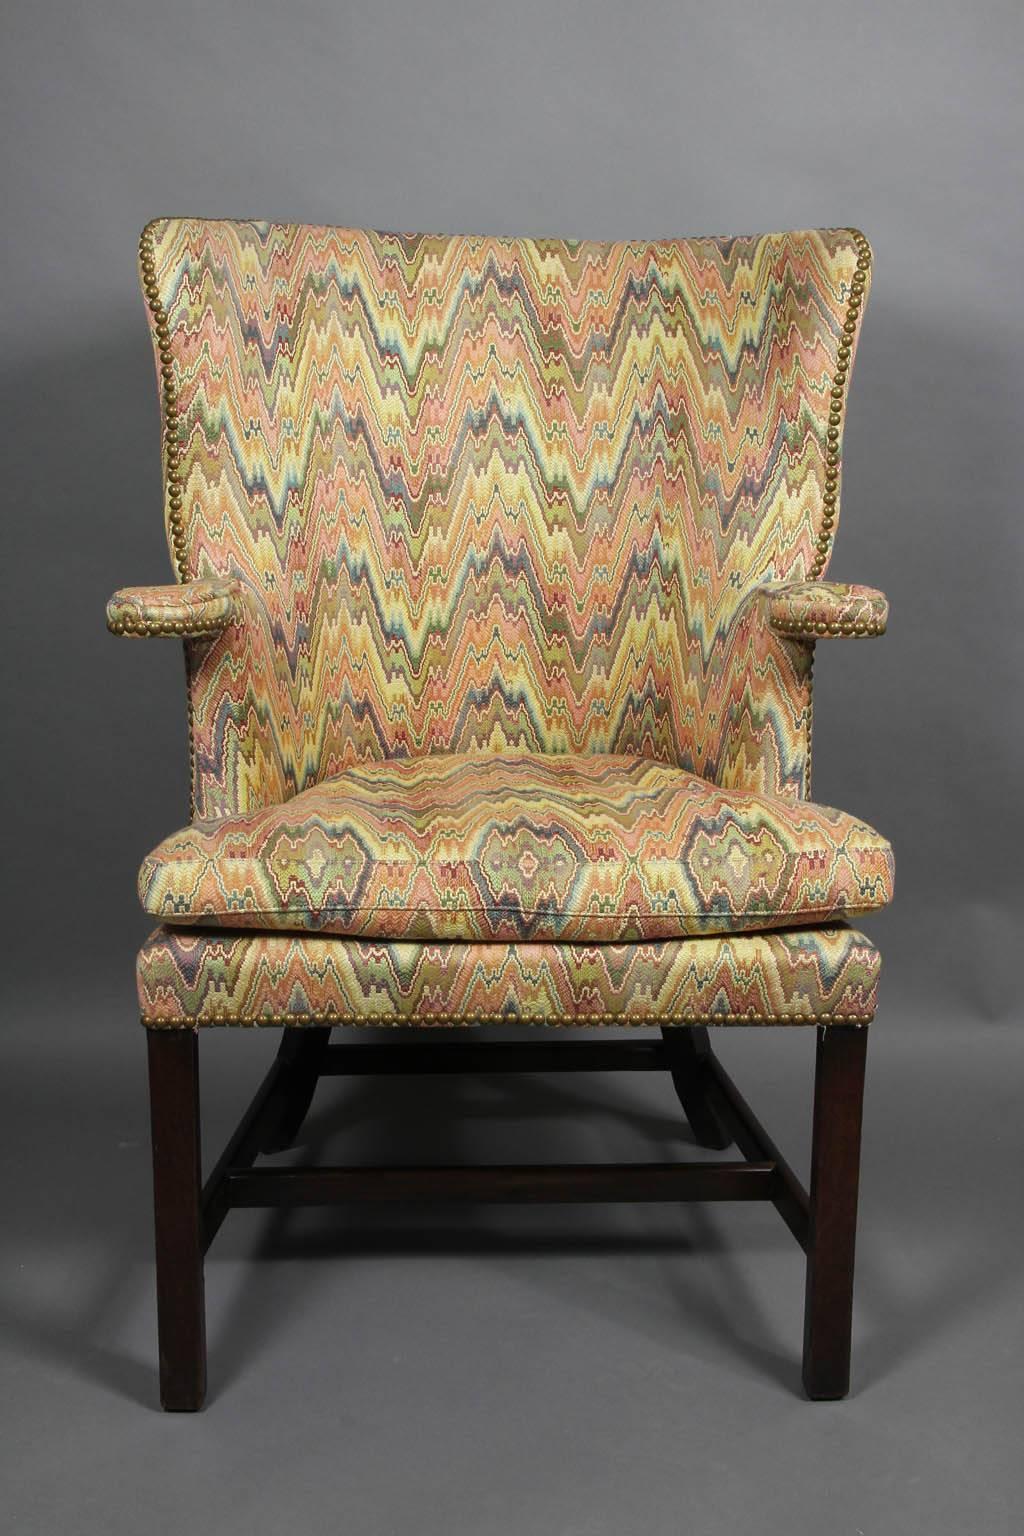 Upholstered in a Bargello style fabric with brass tacks, loose cushion, barrel back, raised on square legs with splayed rear legs.